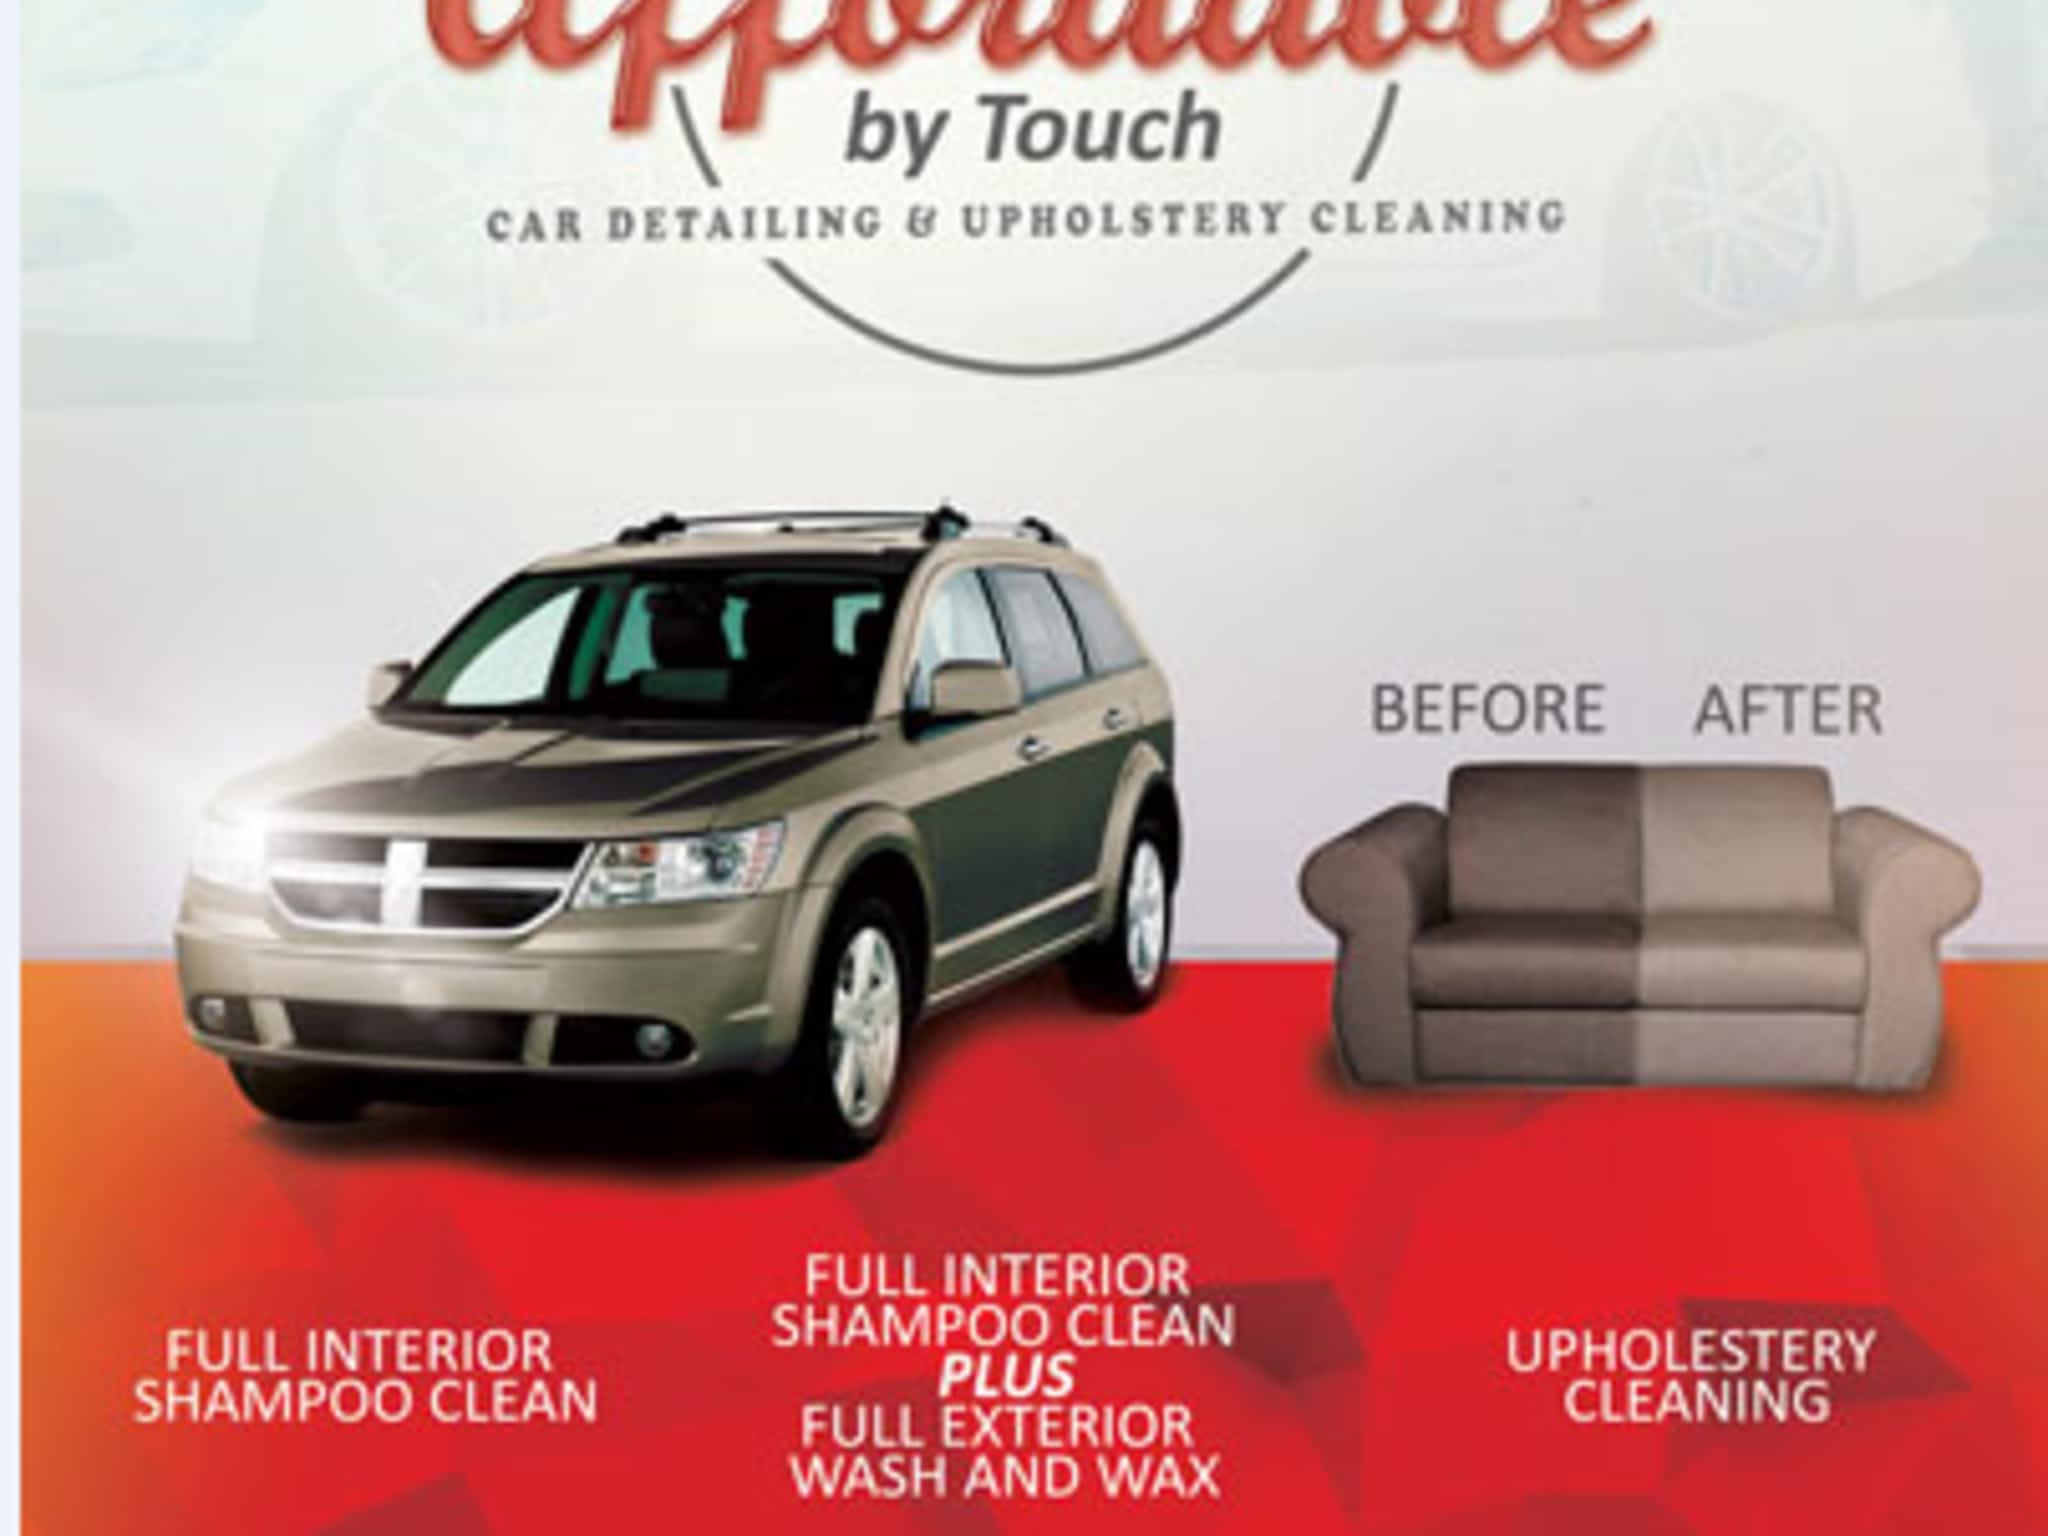 photo Affordable by Touch Car Detailing & Upholstery C leaning